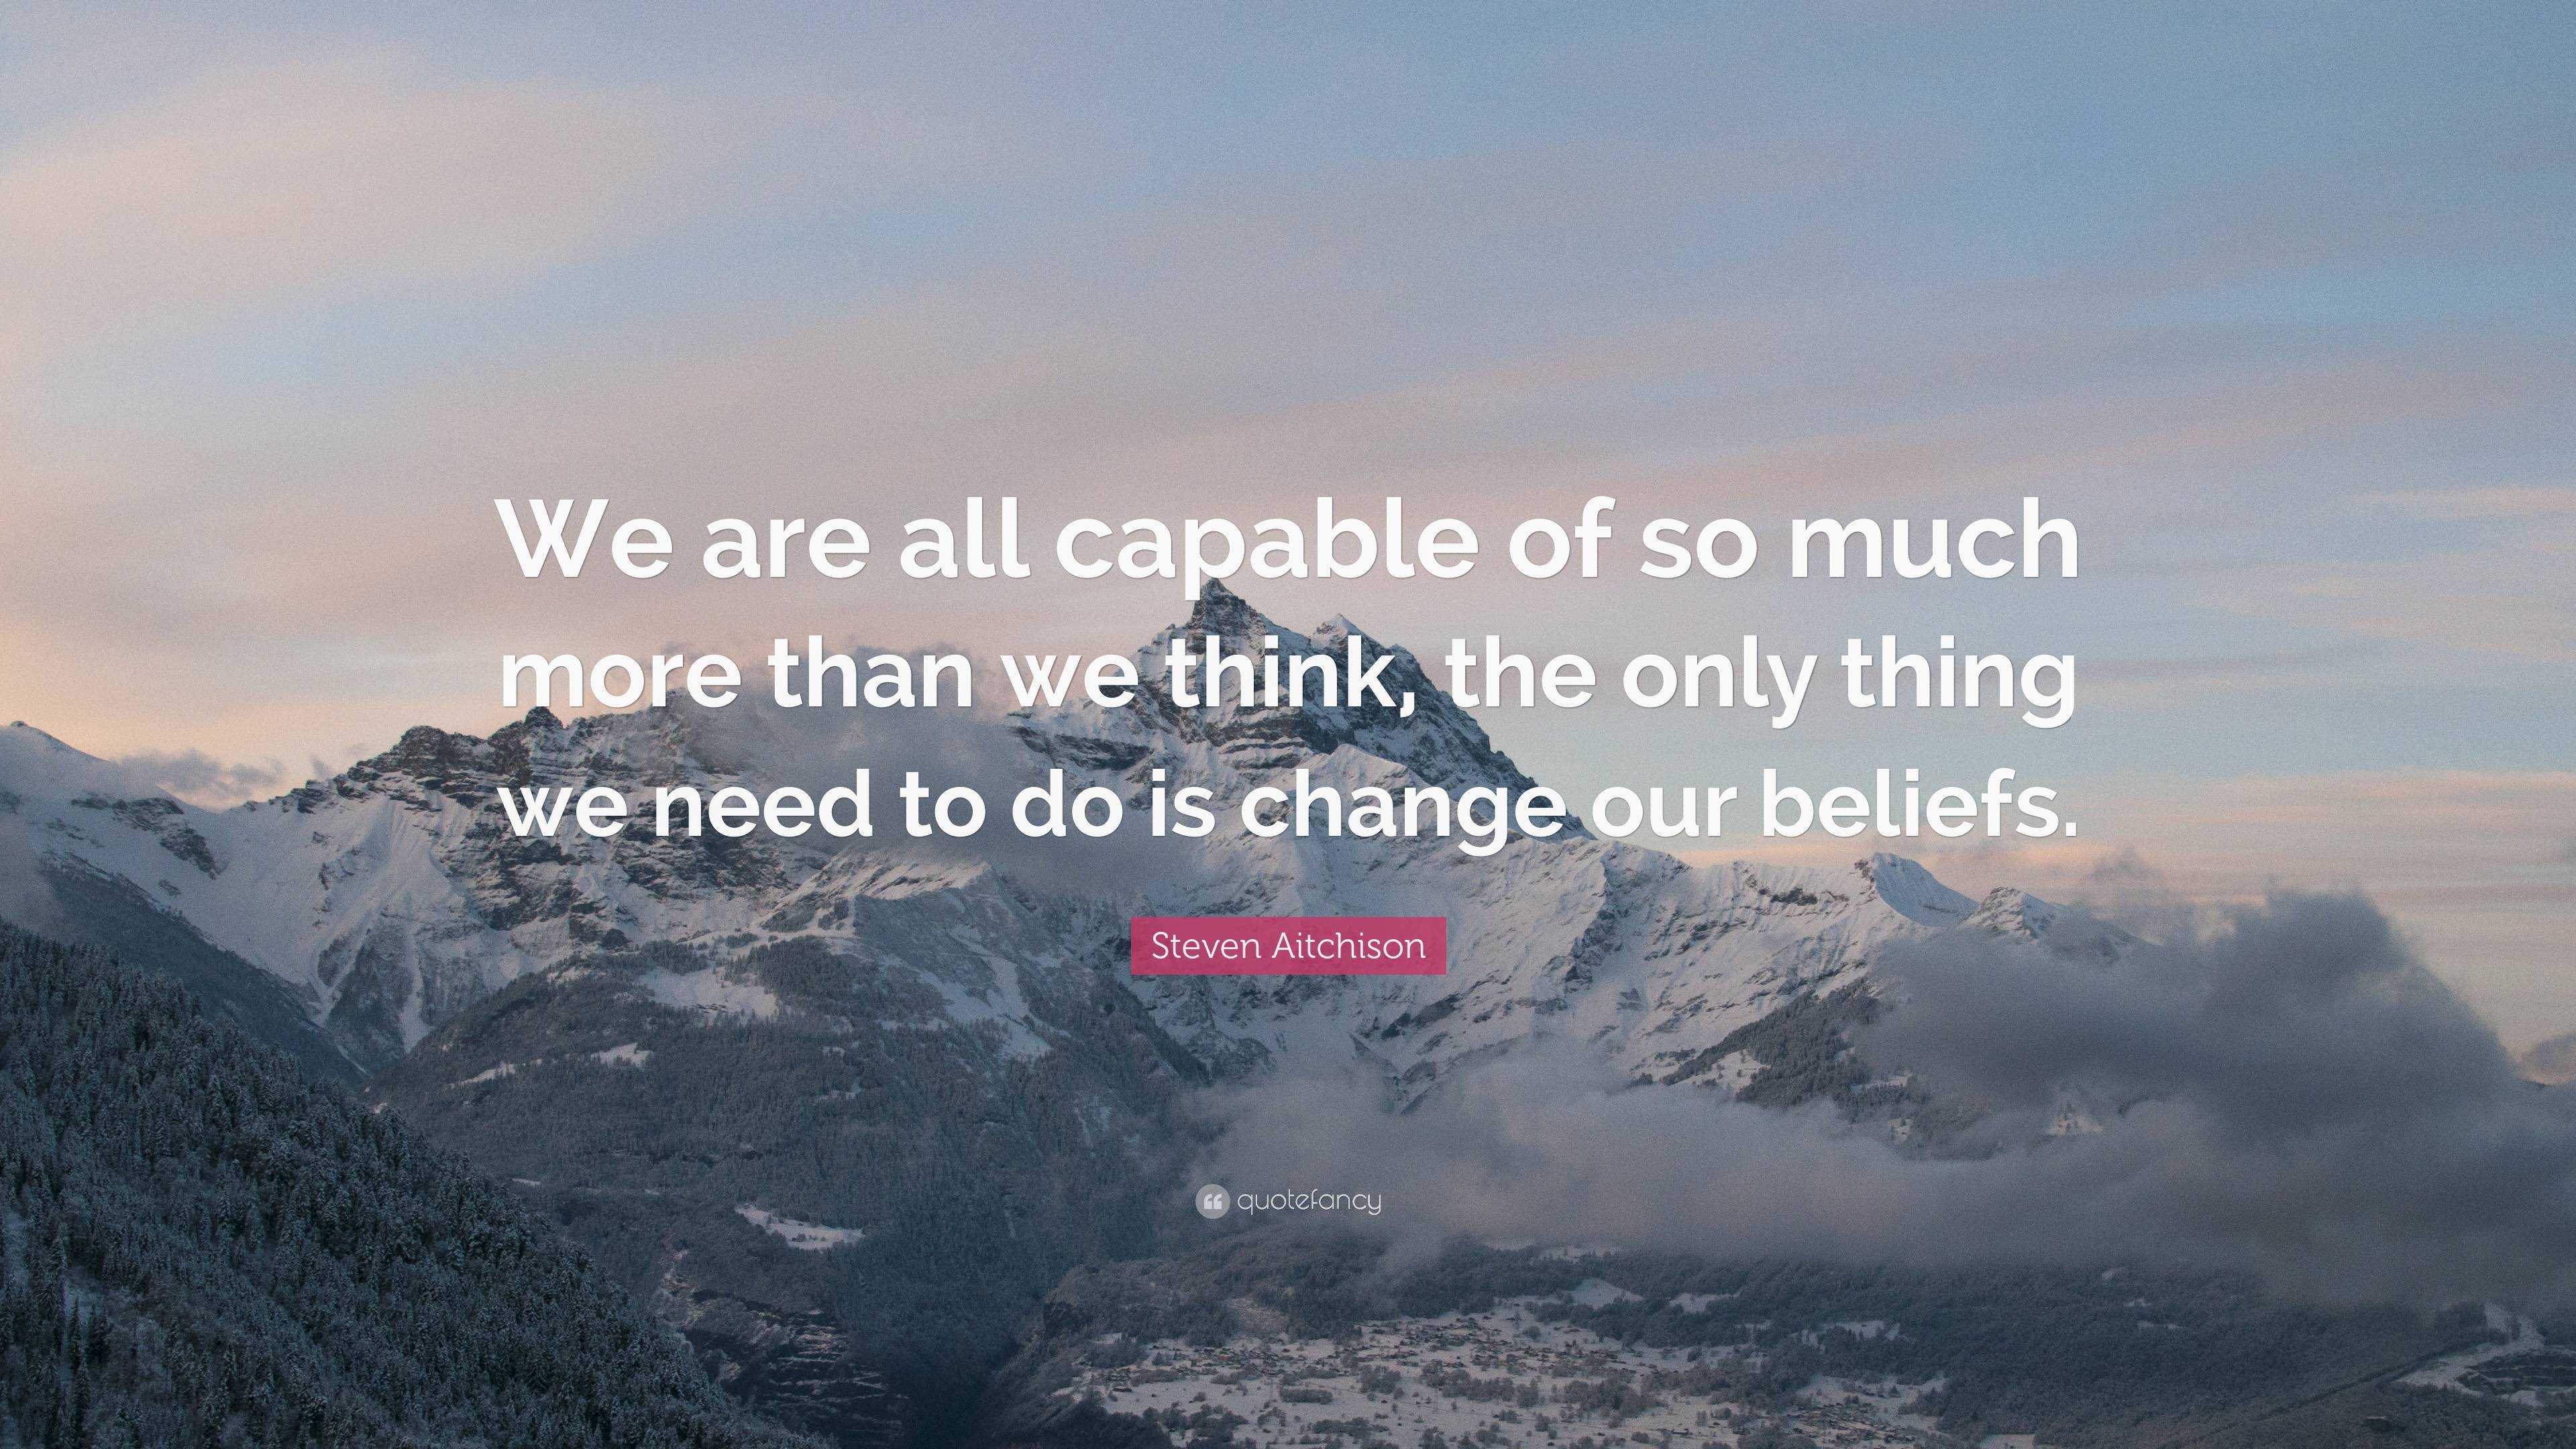 Steven Aitchison Quote: “We are all capable of so much more than we ...